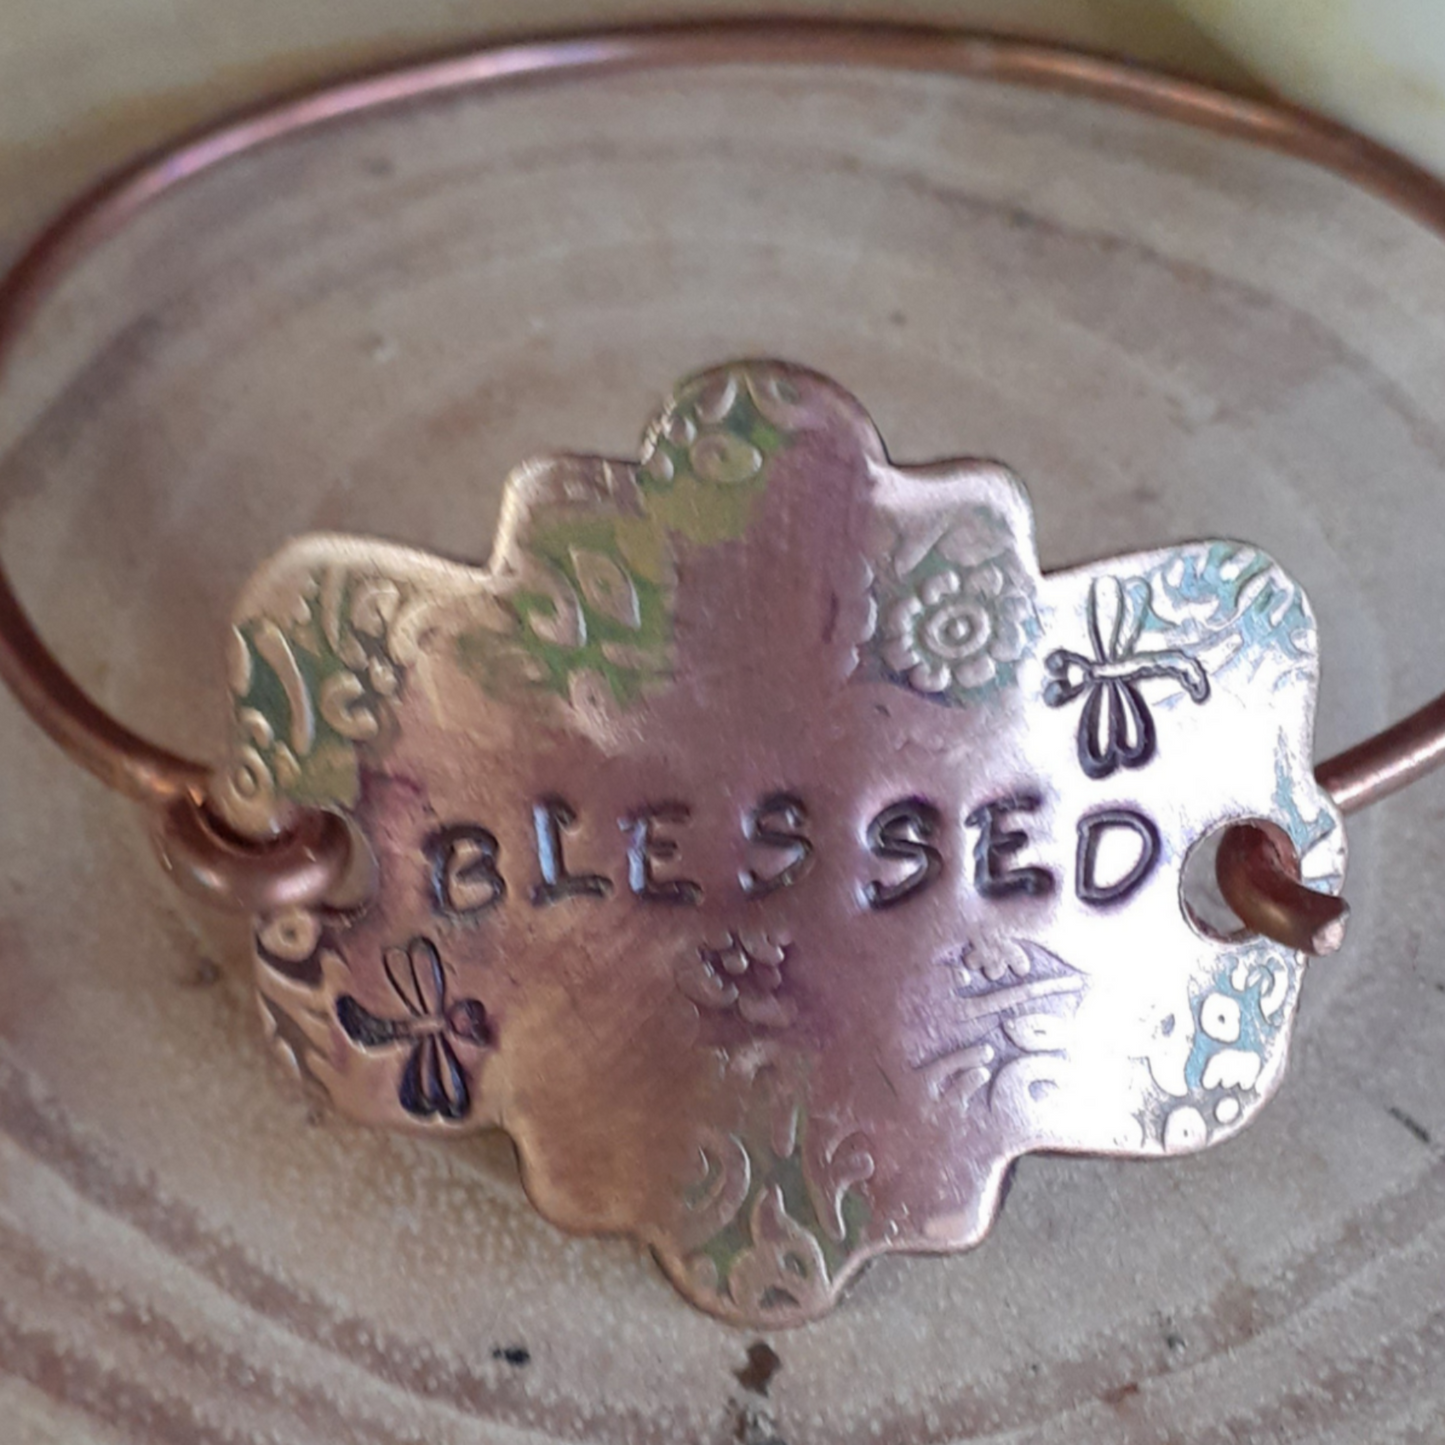 Inspirational Copper Stamped Tension Bracelets|WRD - WarmRainyDay